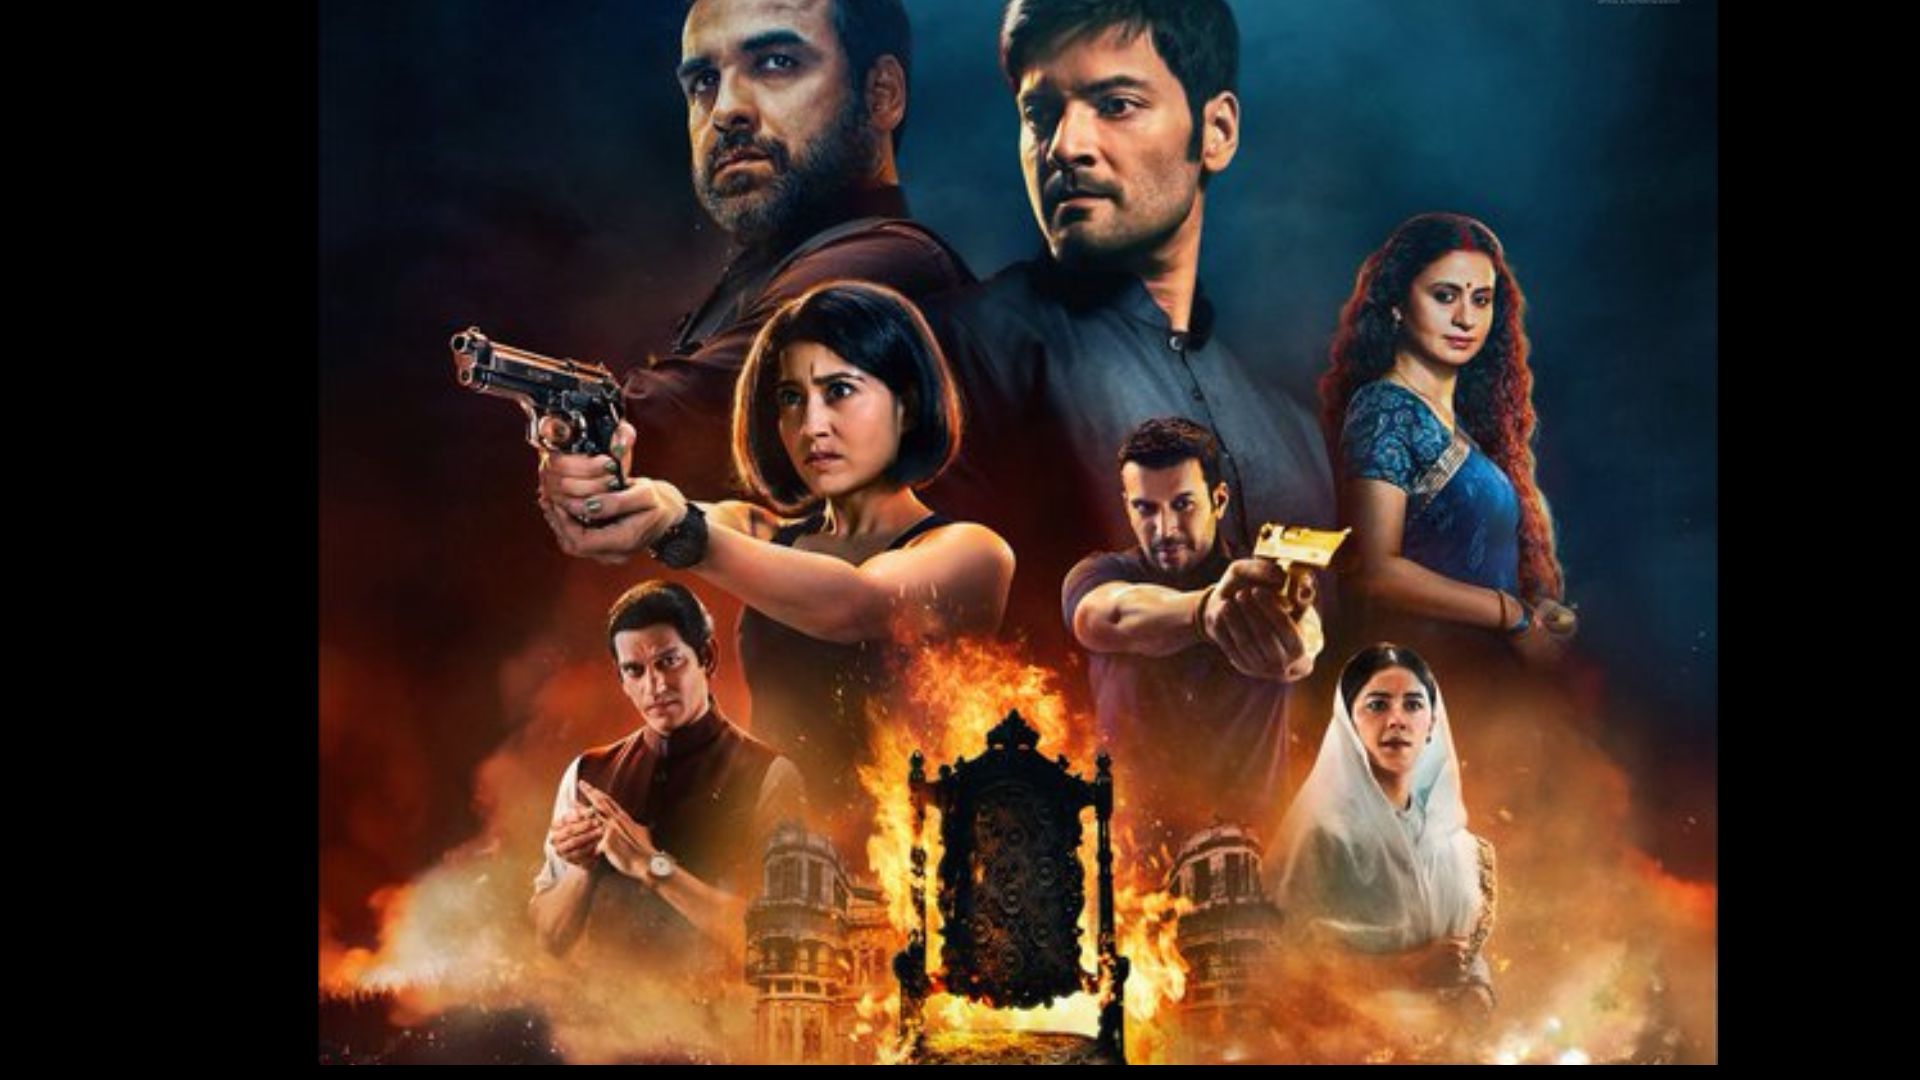 The official release date for the much-awaited OTT series Mirzapur has been confirmed